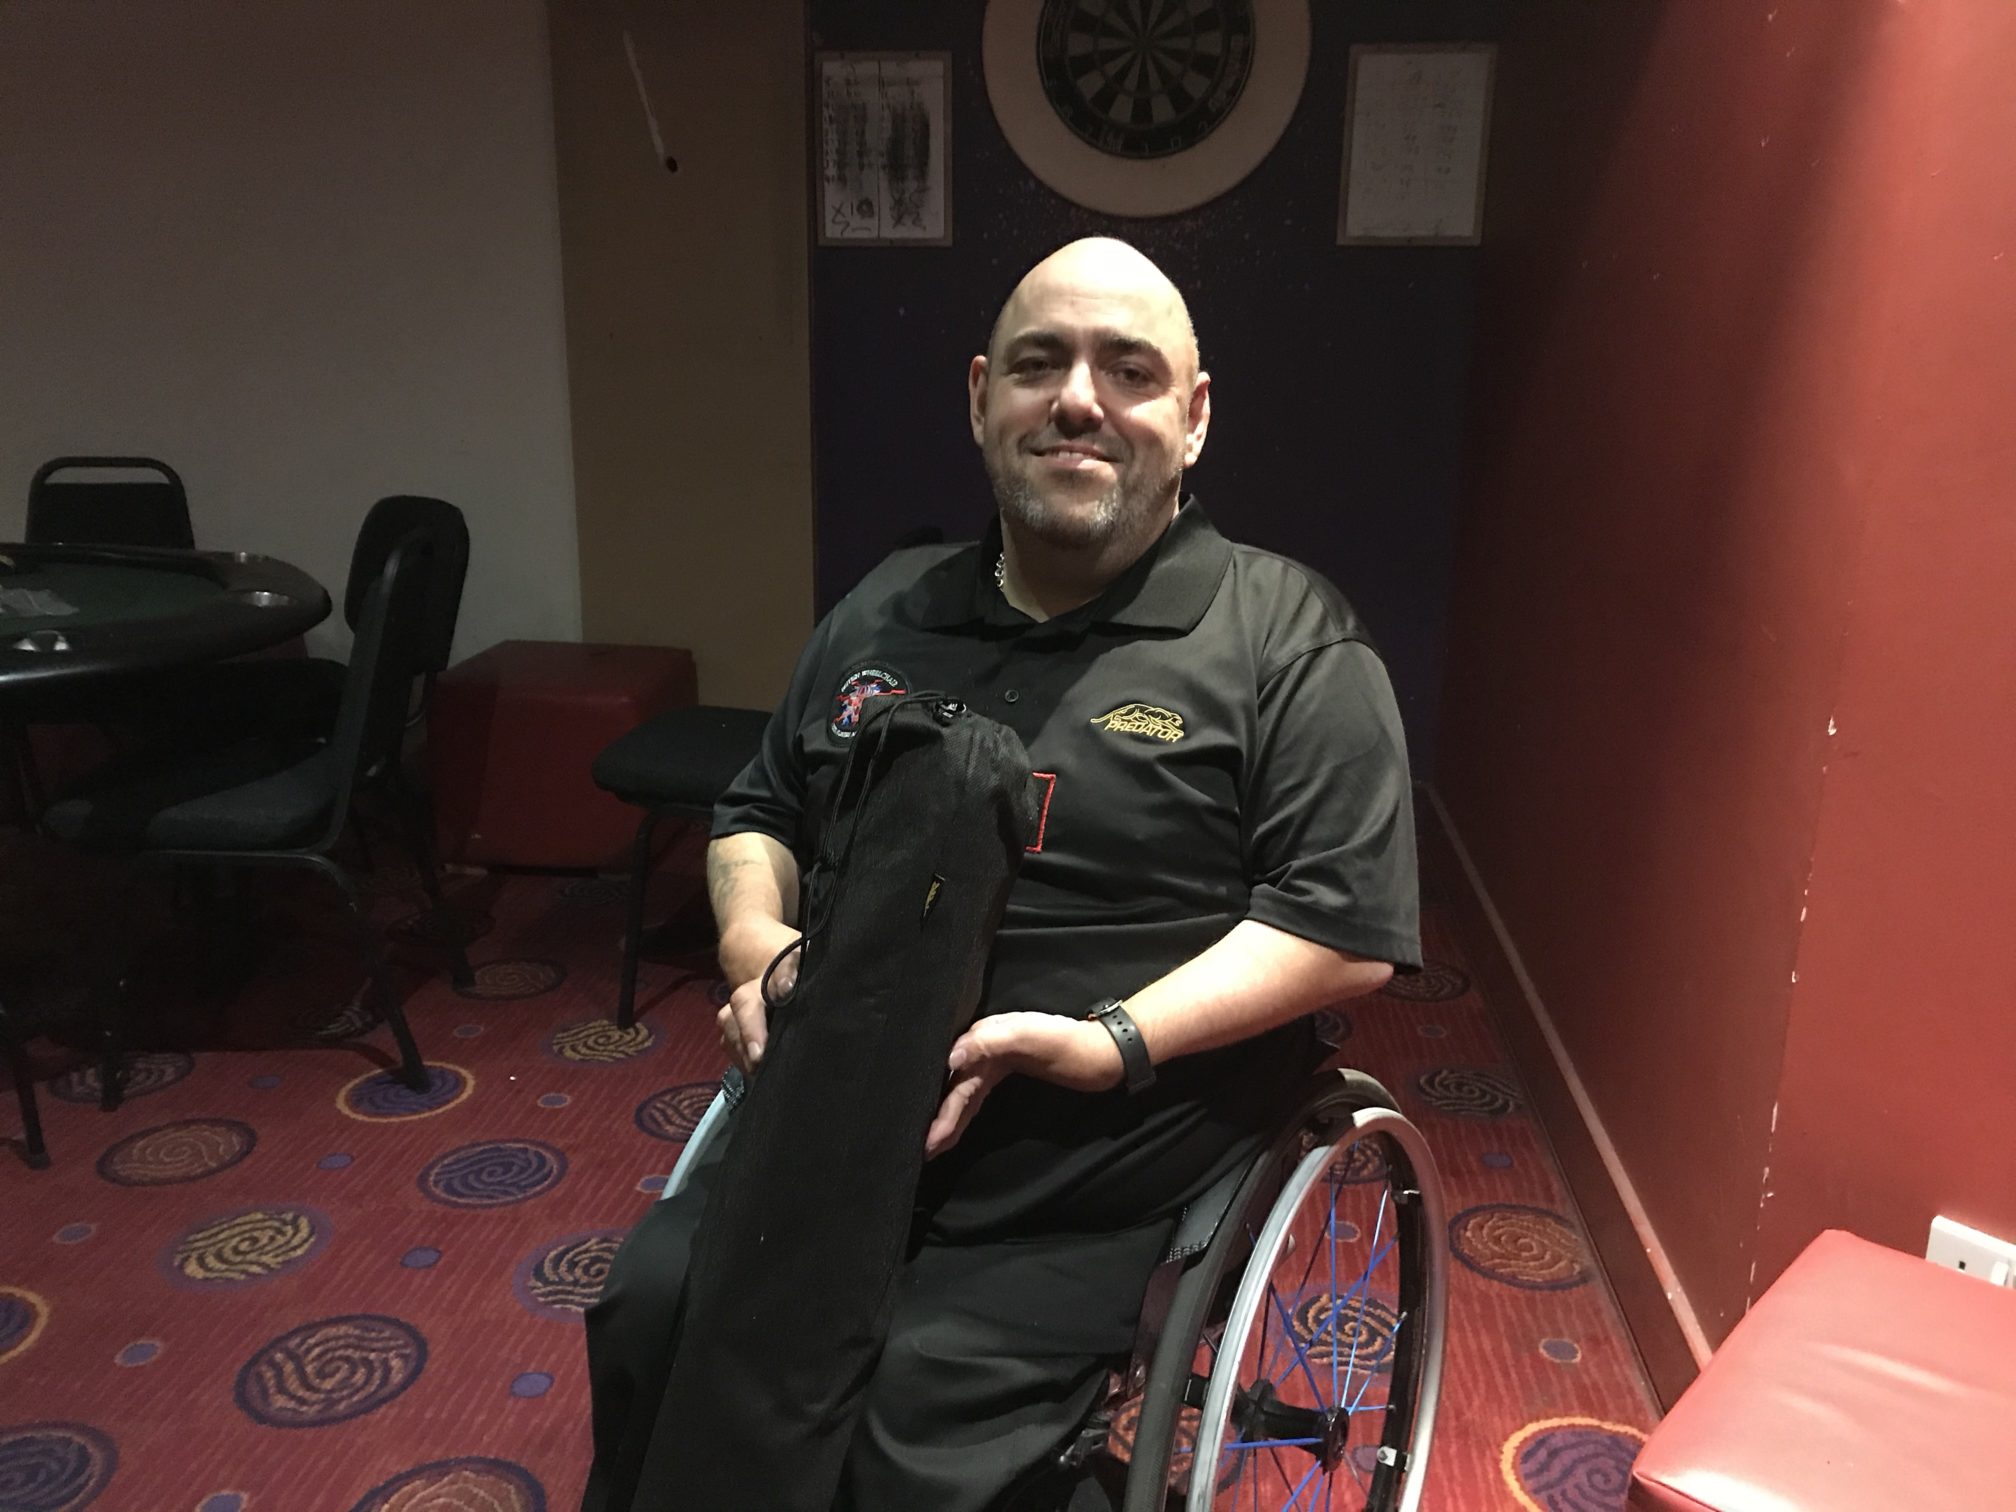 Roy Kimberley with Predator Sneaky Pete cue for no3 in rankings